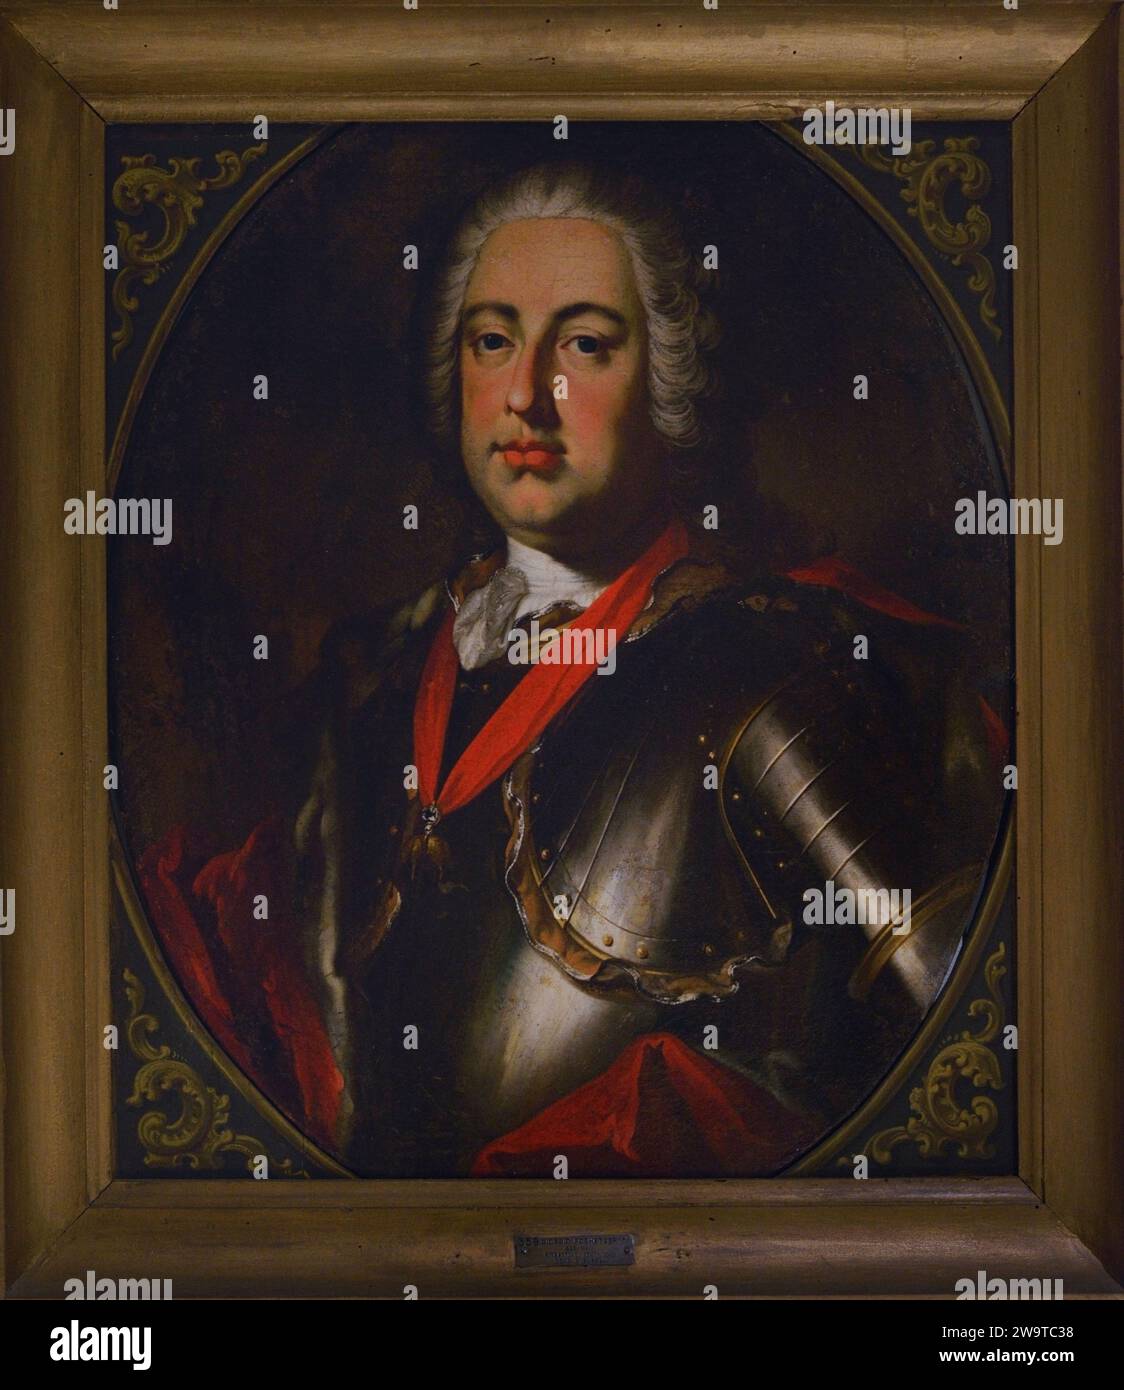 Johann Georg Fockhetzer. Bavarian painter, active in Cremona between 1758 and 1773. Portrait of a knight wearing armour of the Cauzzi family. Oil on canvas. Museo Civico Ala Ponzone. Cremona. Lombardy. Italy. Stock Photo